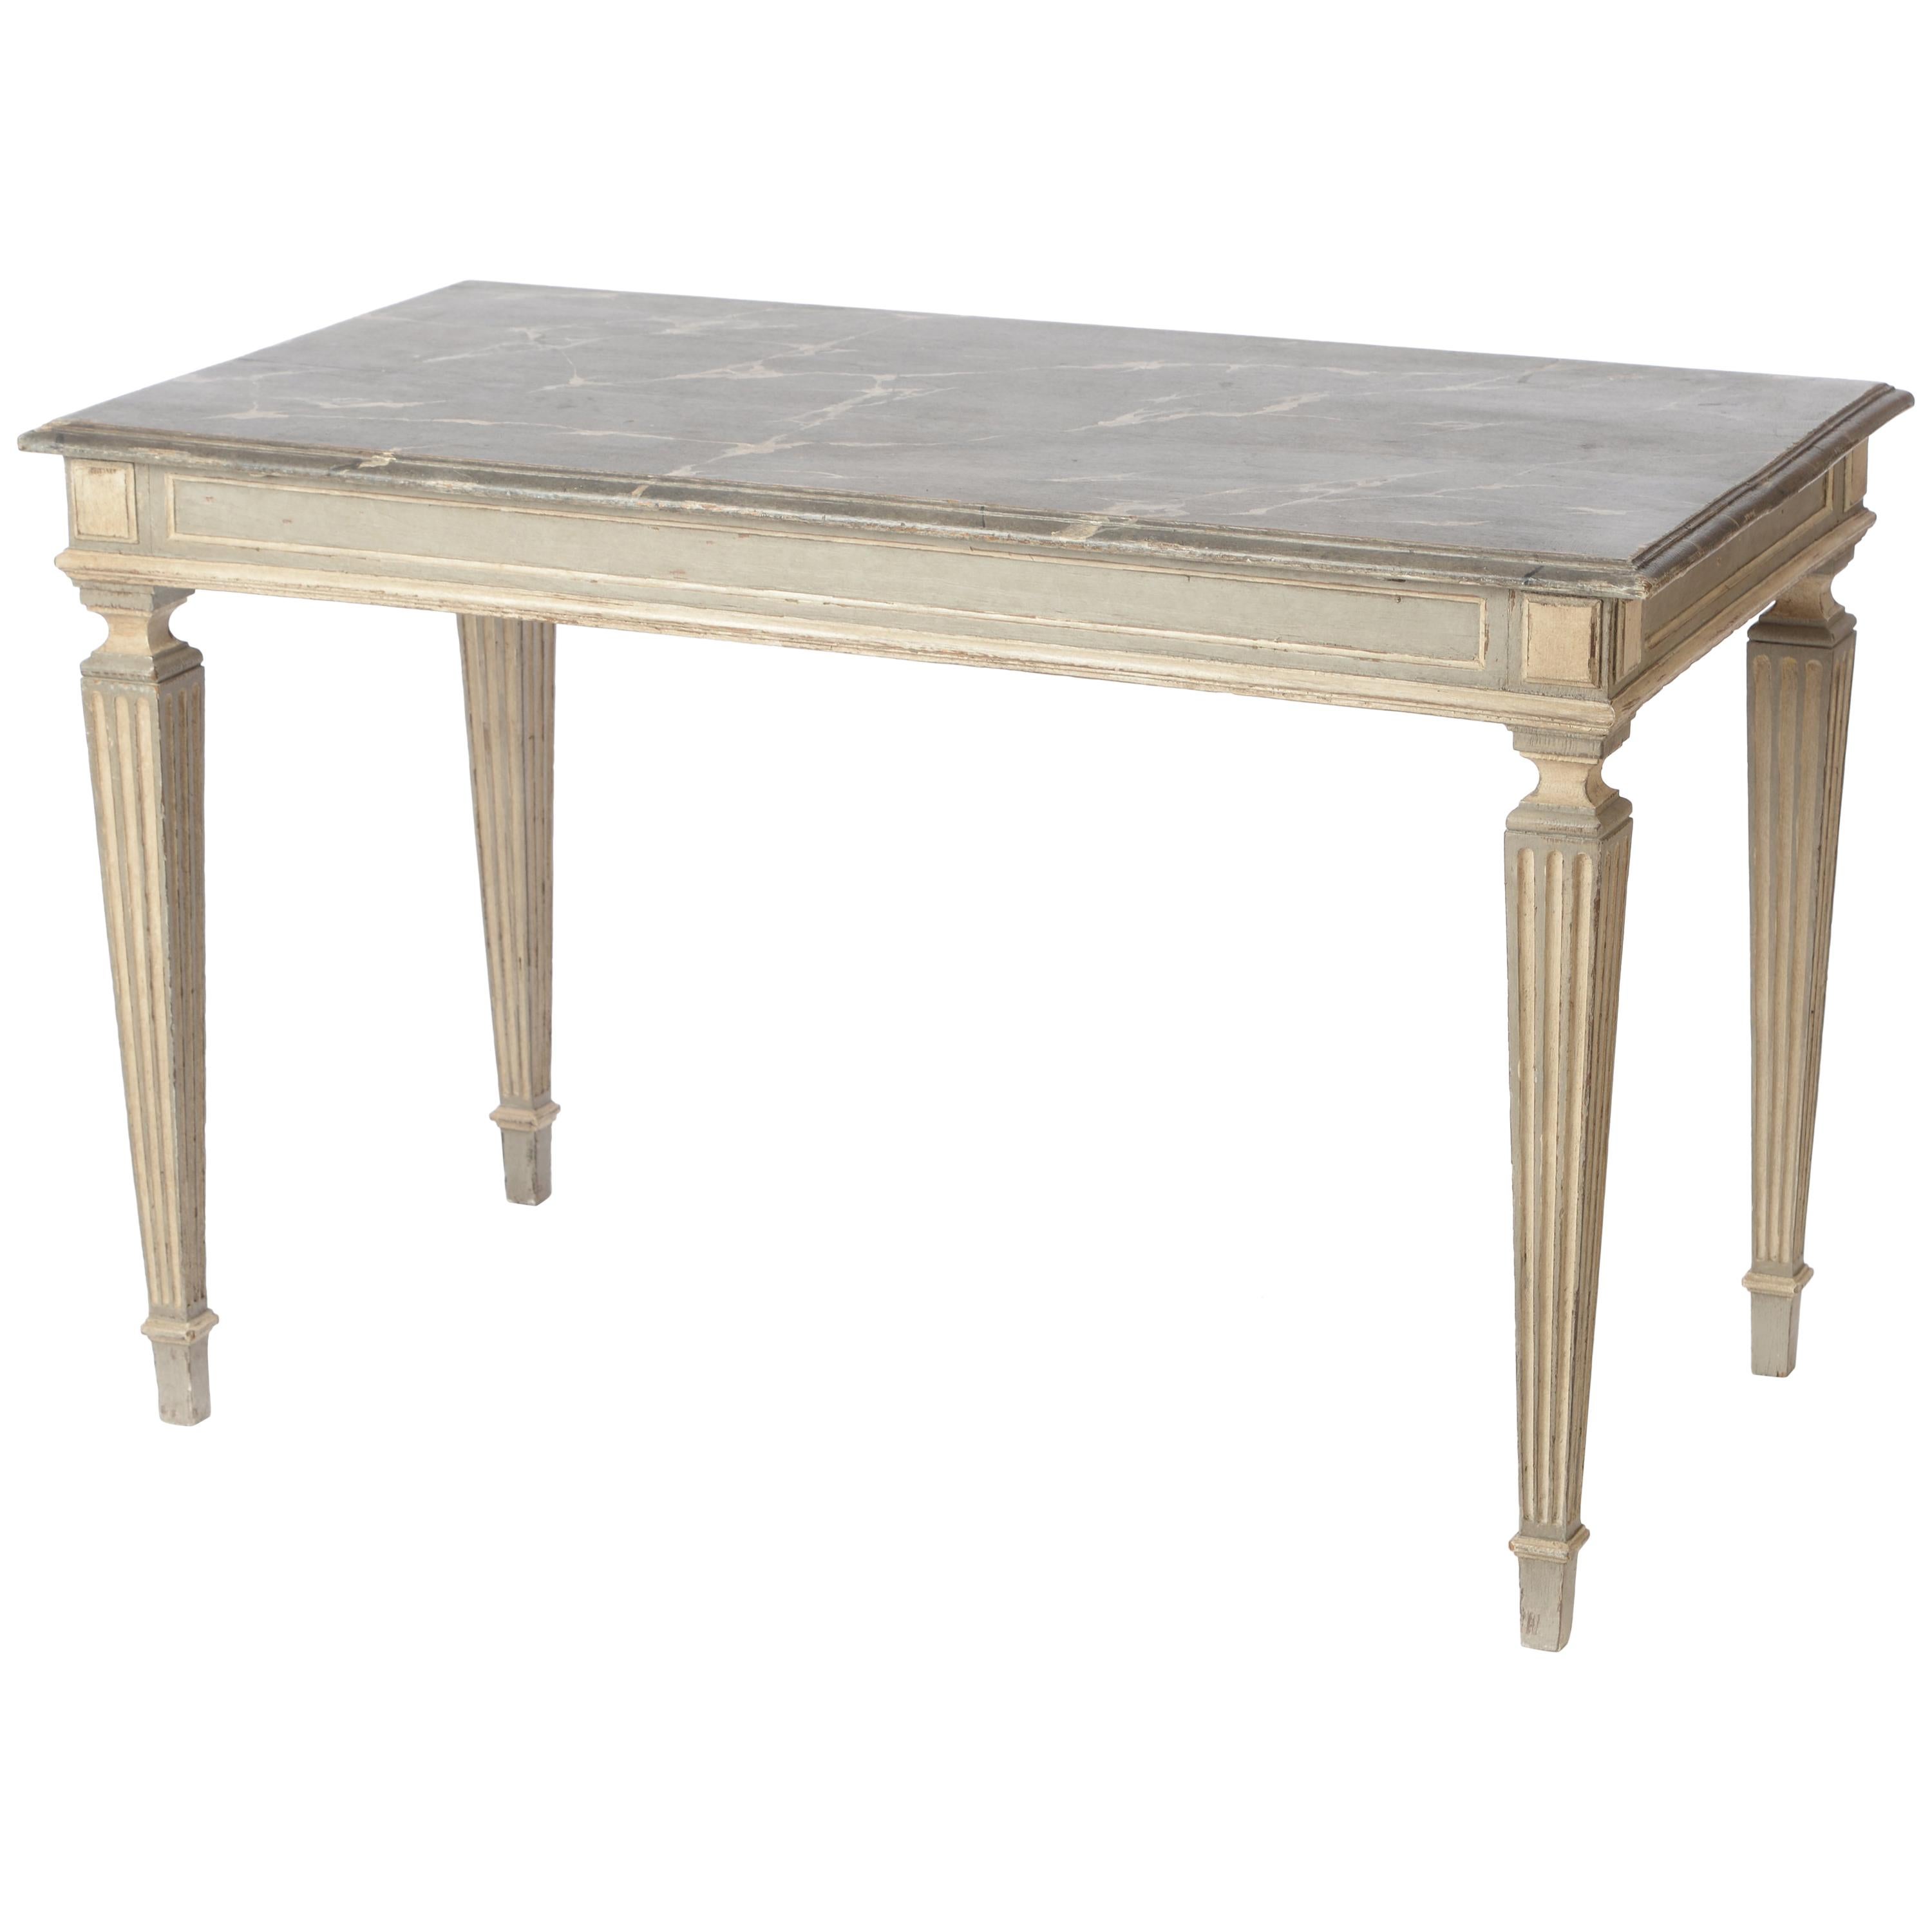 19th Century French Console Table in the Style of Louis XVI